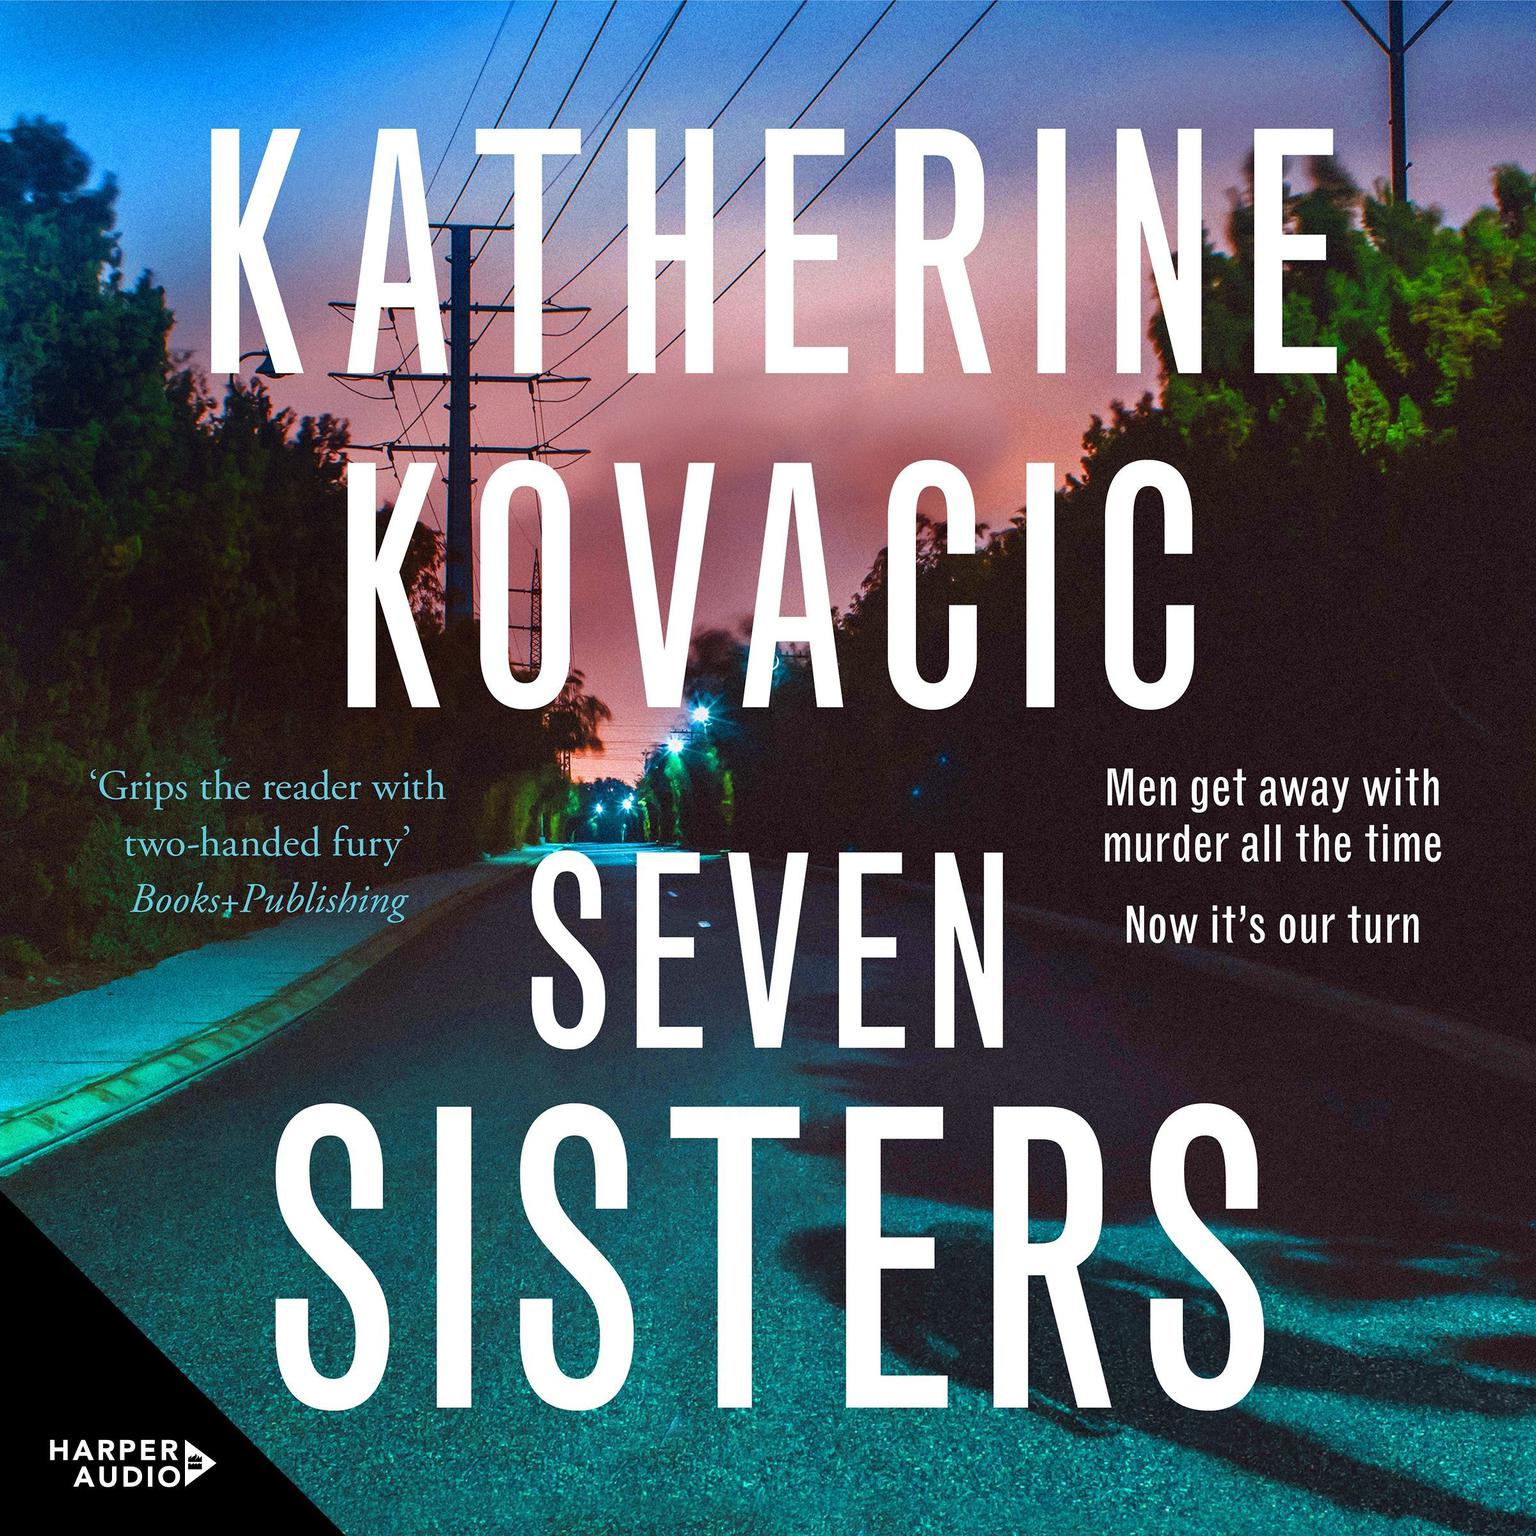 Seven Sisters: The gripping unputdownable new crime thriller from a bestselling author for fans of Jane Caro, Jacqueline Bublitz and Debra Oswald Audiobook, by Katherine Kovacic